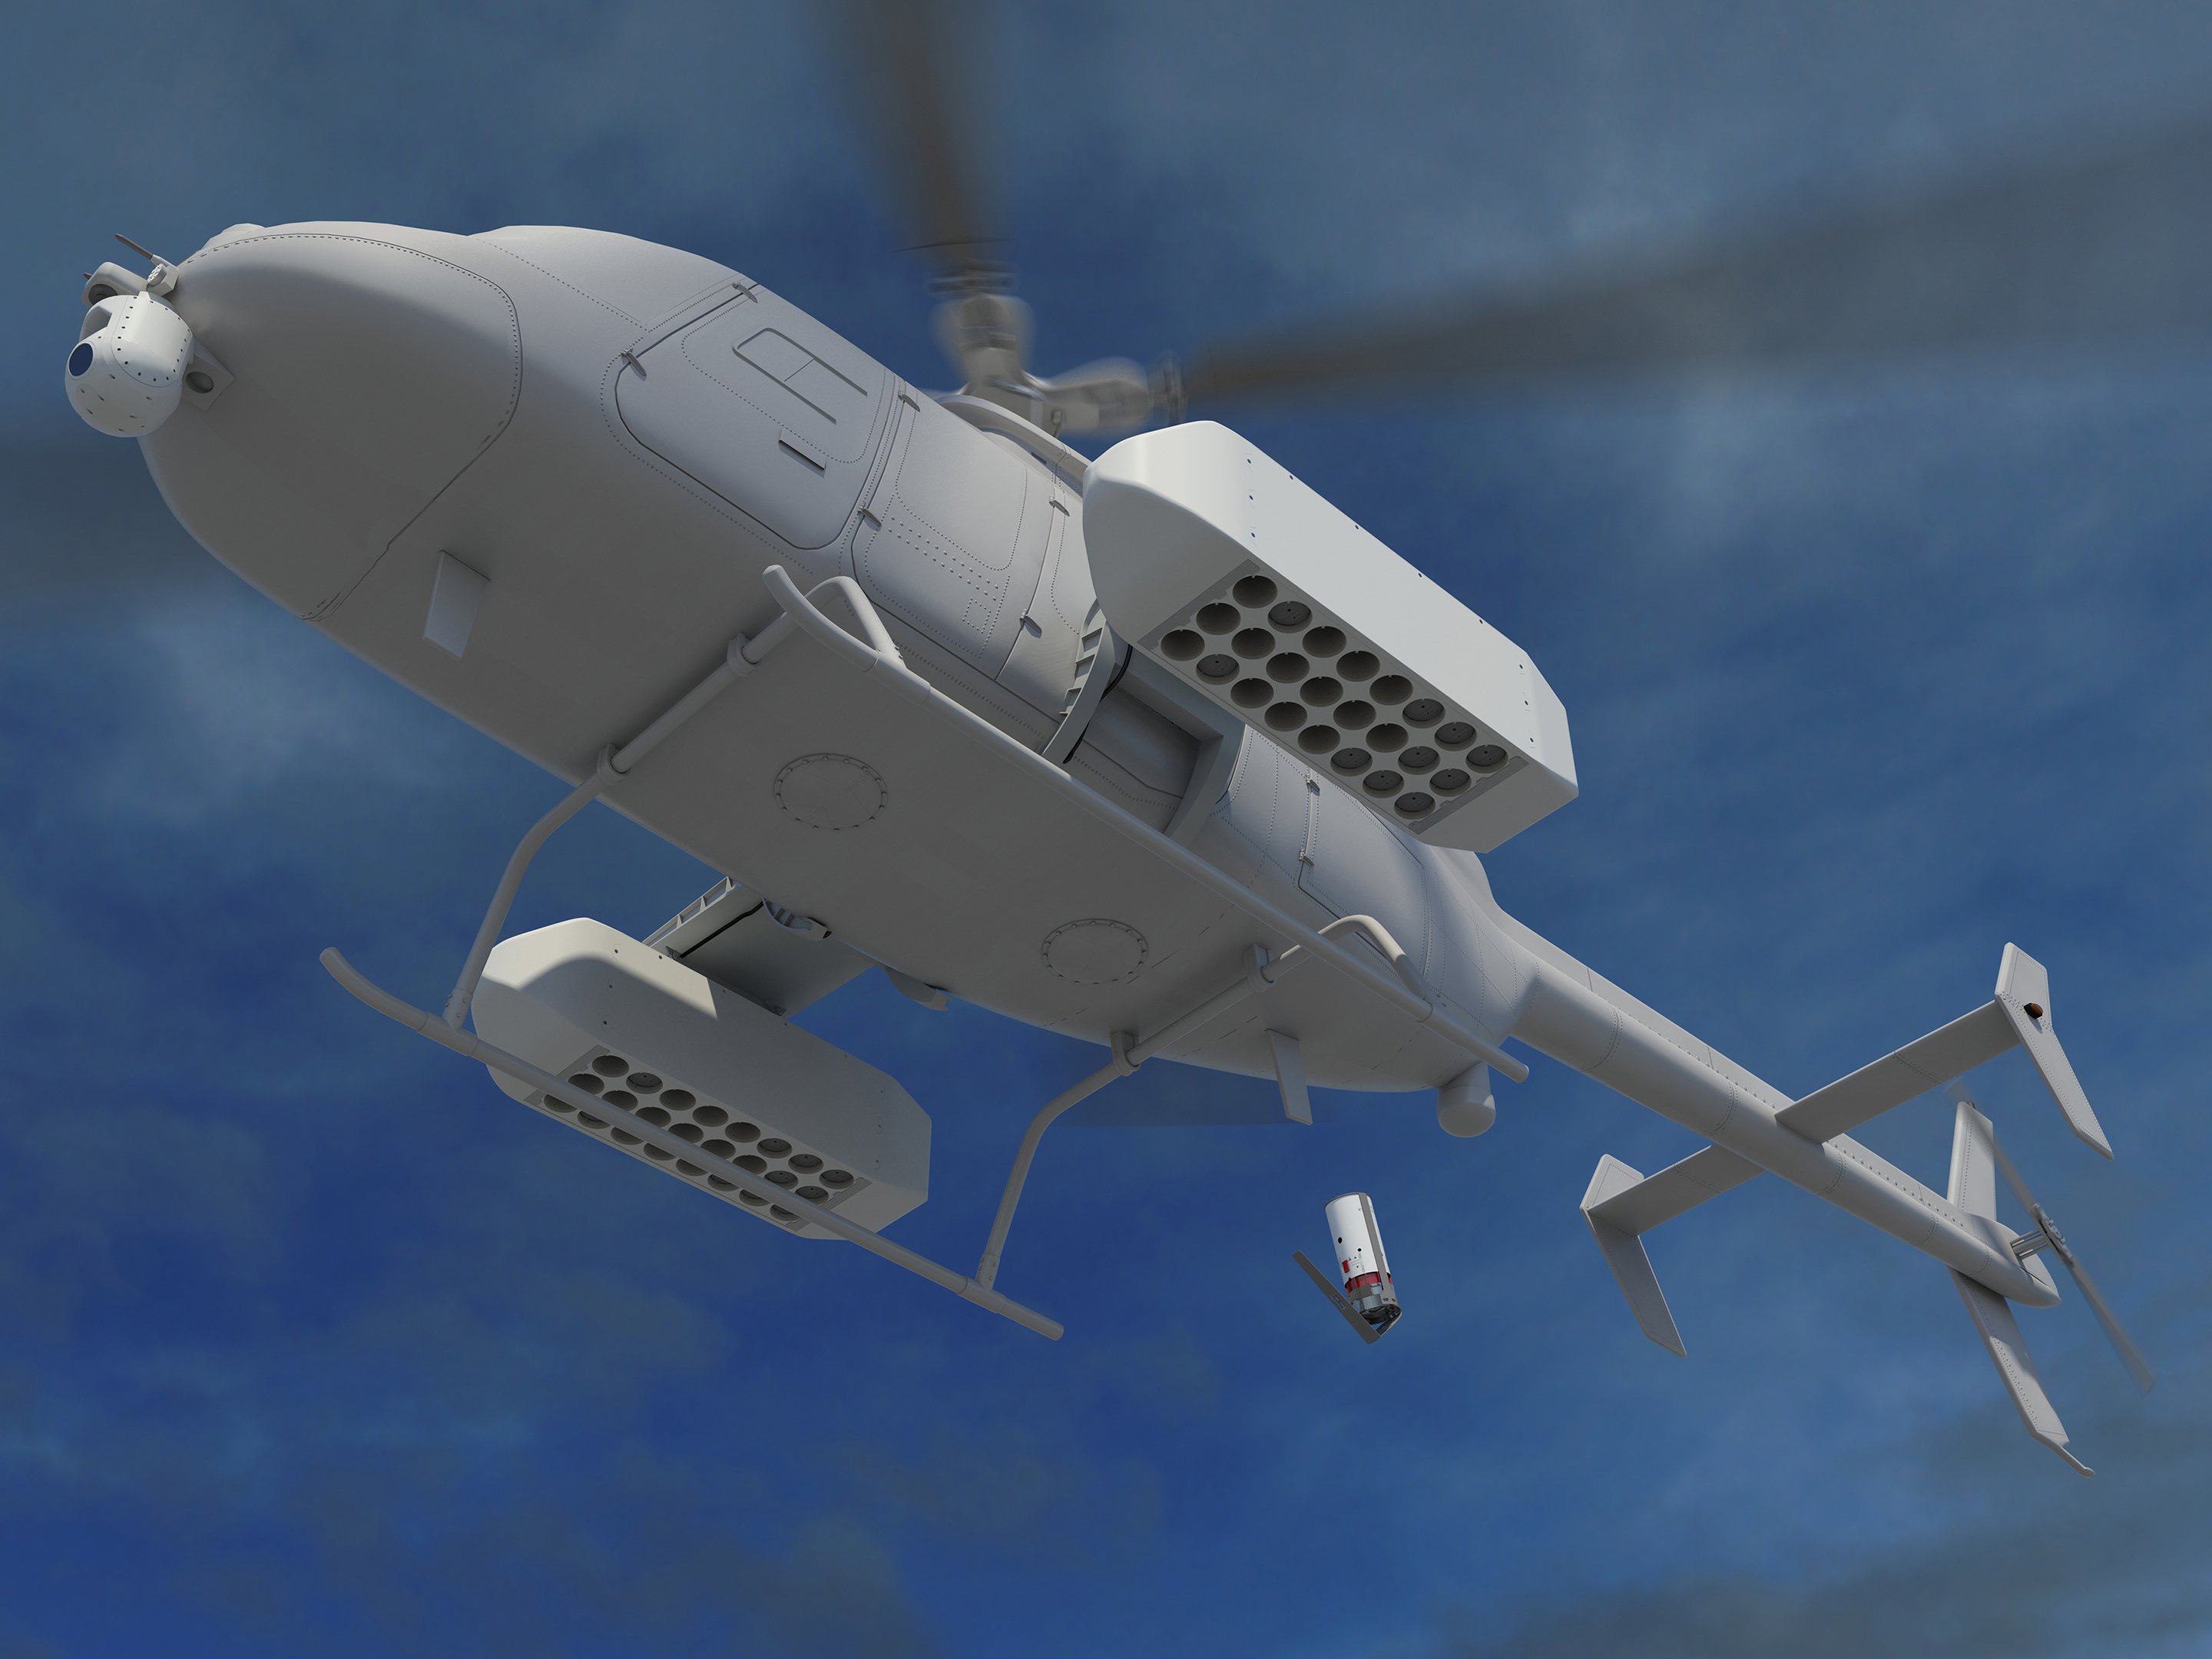 Pitching Scout Helicopter Drone for ASW Missions - News